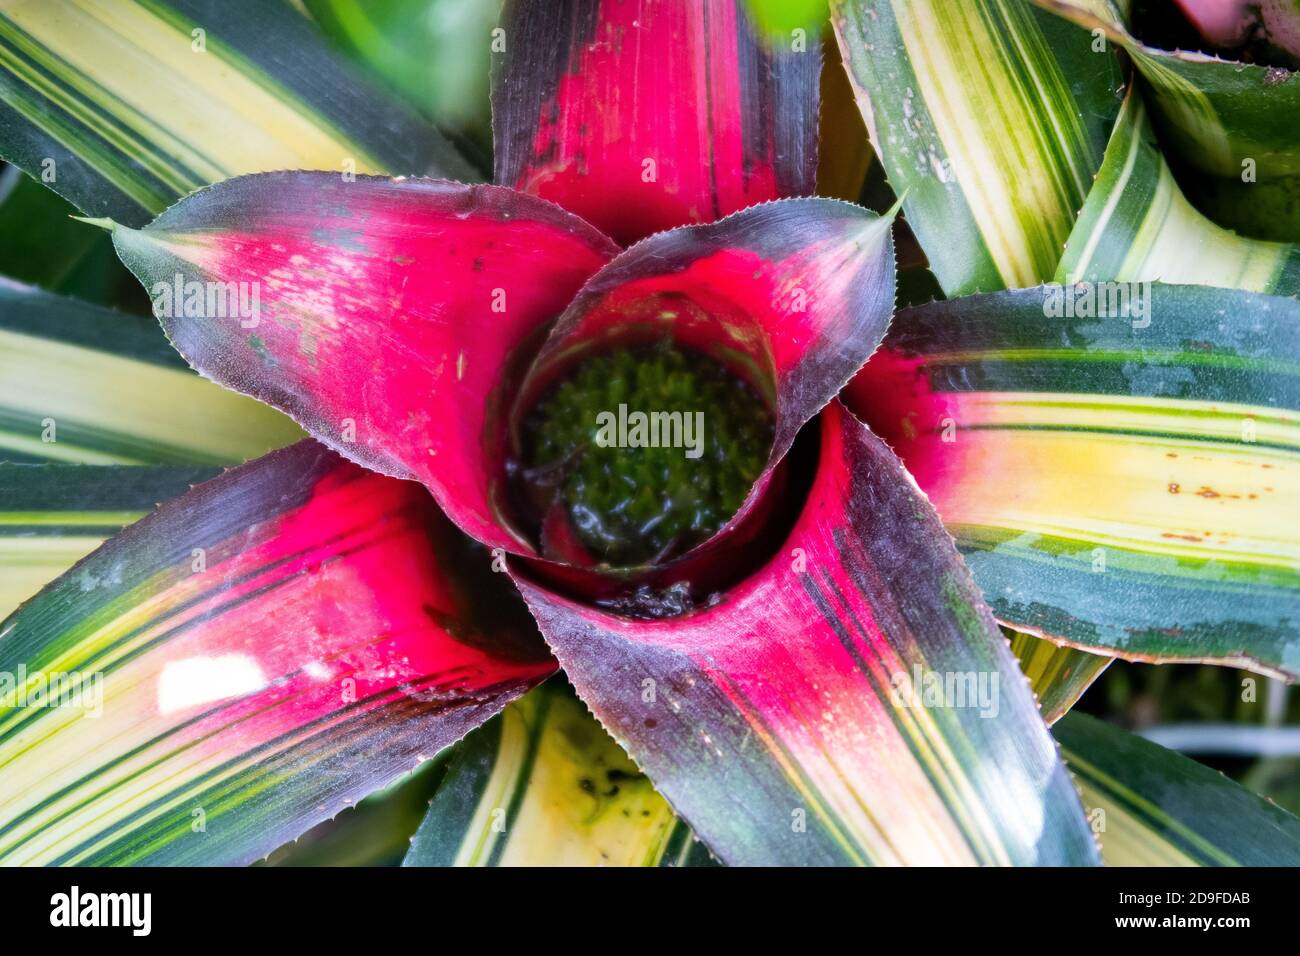 Bromeliad (Bromeliaceae) vivid pink flower with green leaves and water inside, top-down perspective, close-up view. Stock Photo